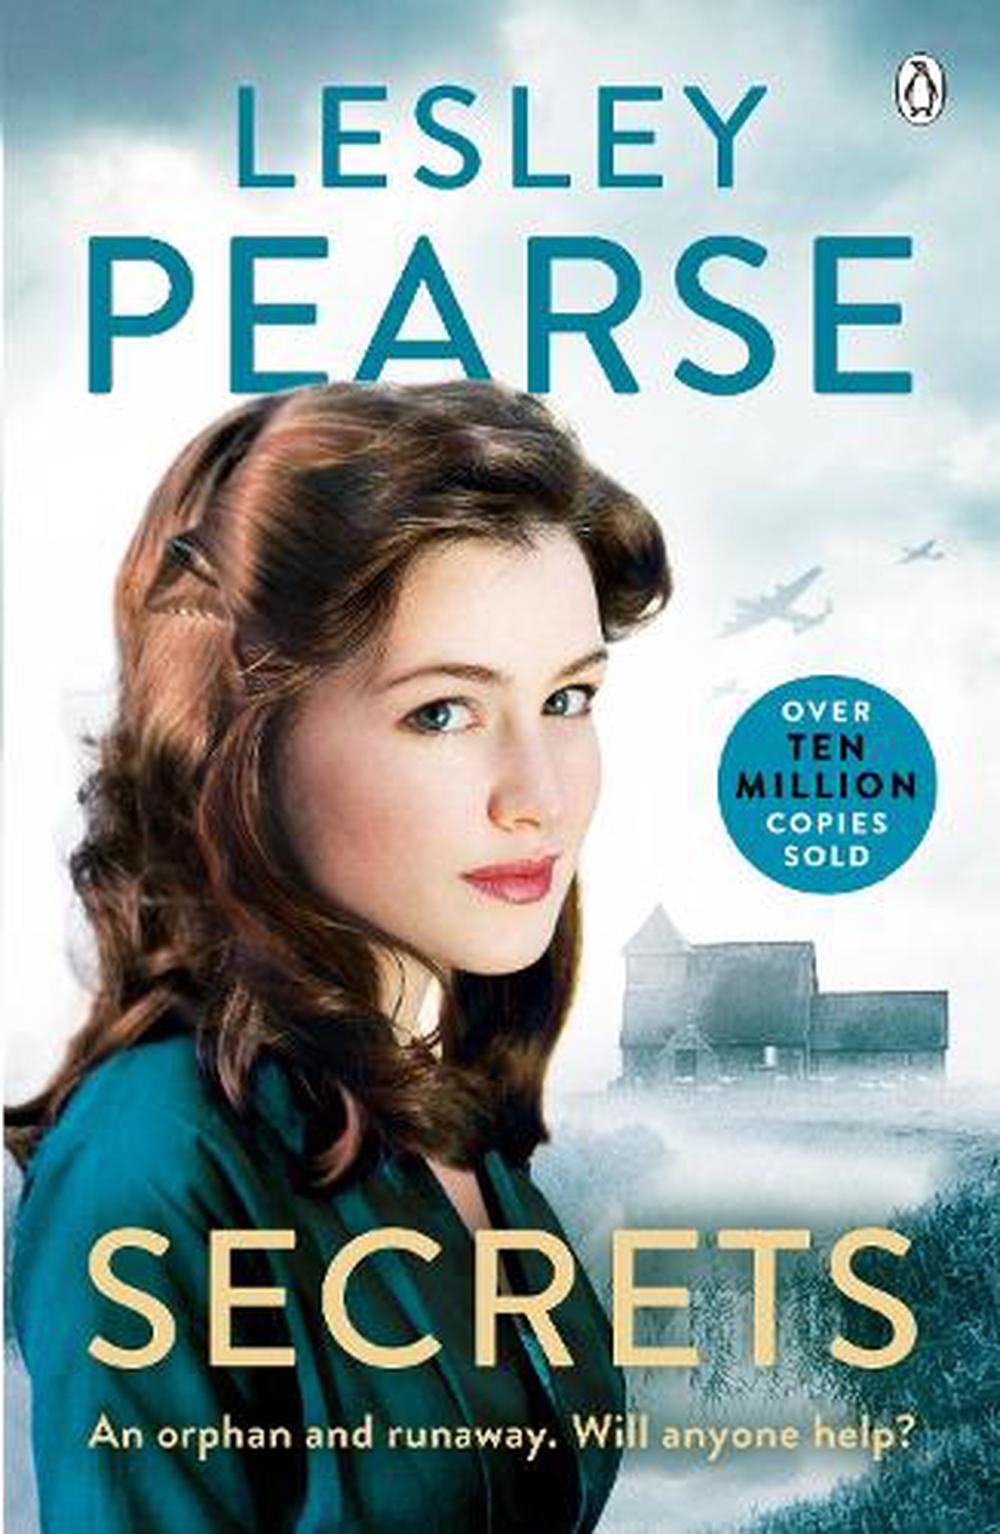 Secrets by Lesley Pearse, Paperback, 9780141046075 | Buy online at The Nile